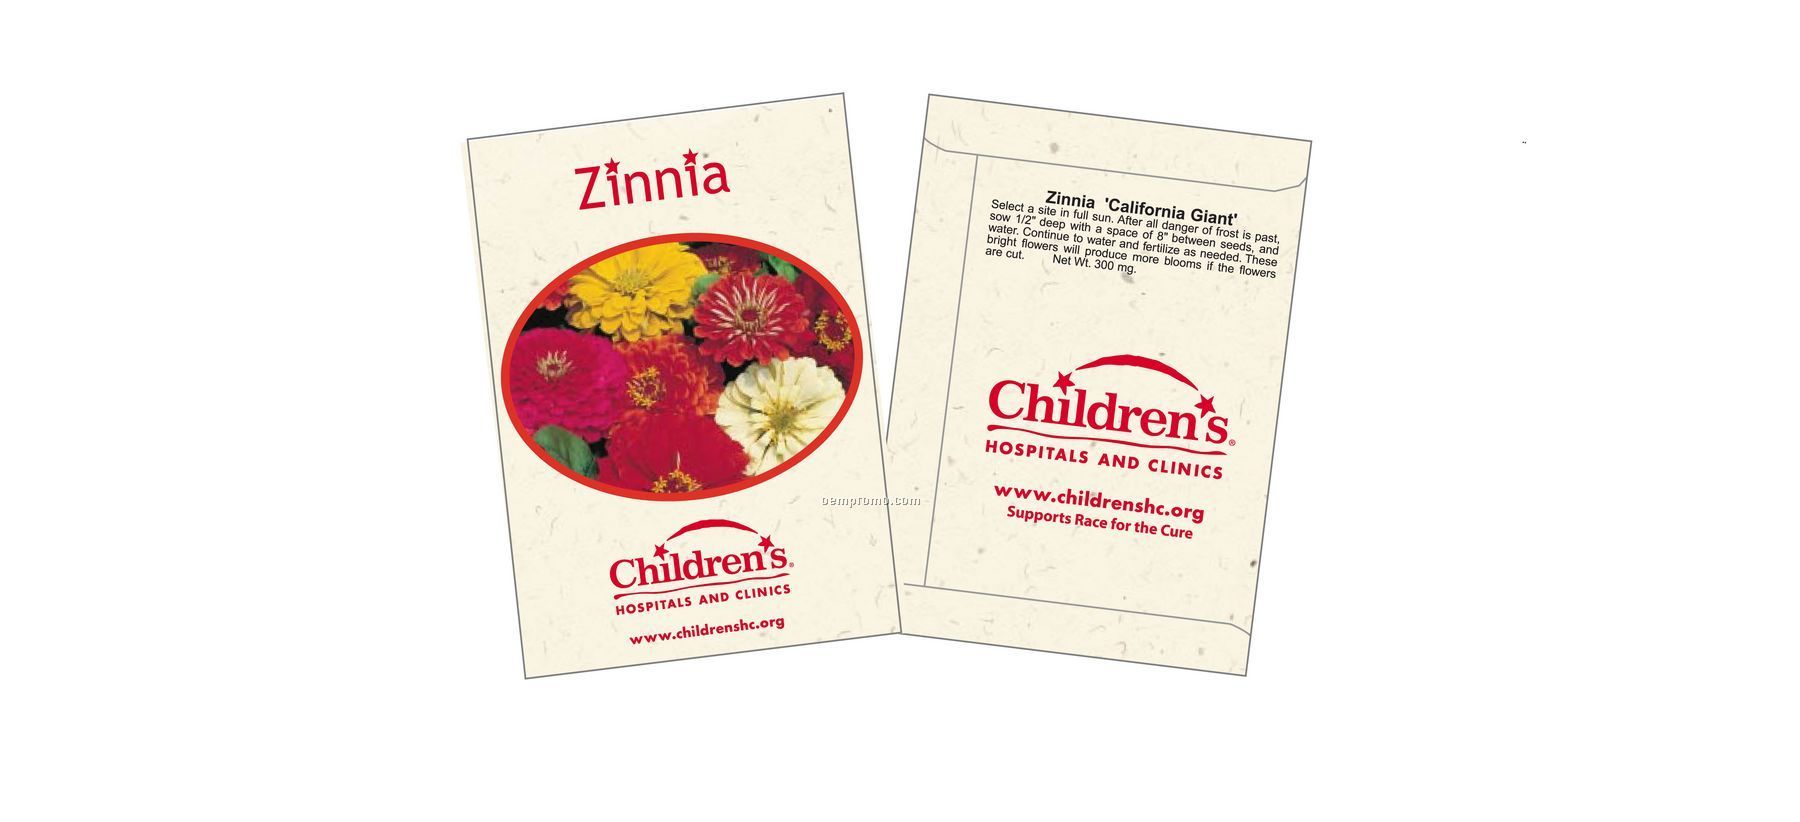 Zinnia - California Giant - Flower Seed Packet (1 Color)